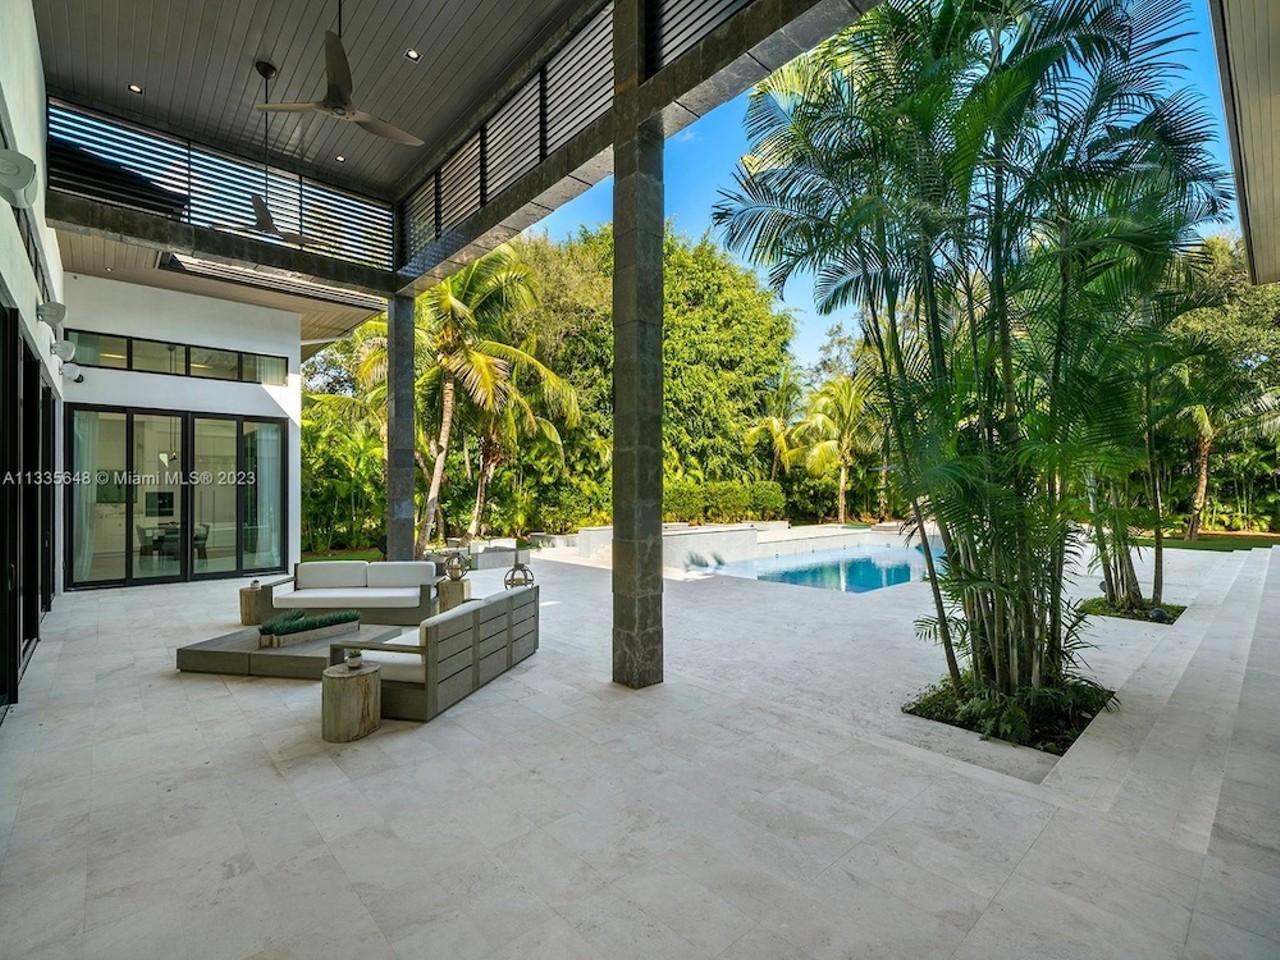 Red Sox legend David Ortiz is selling his giant Florida mansion